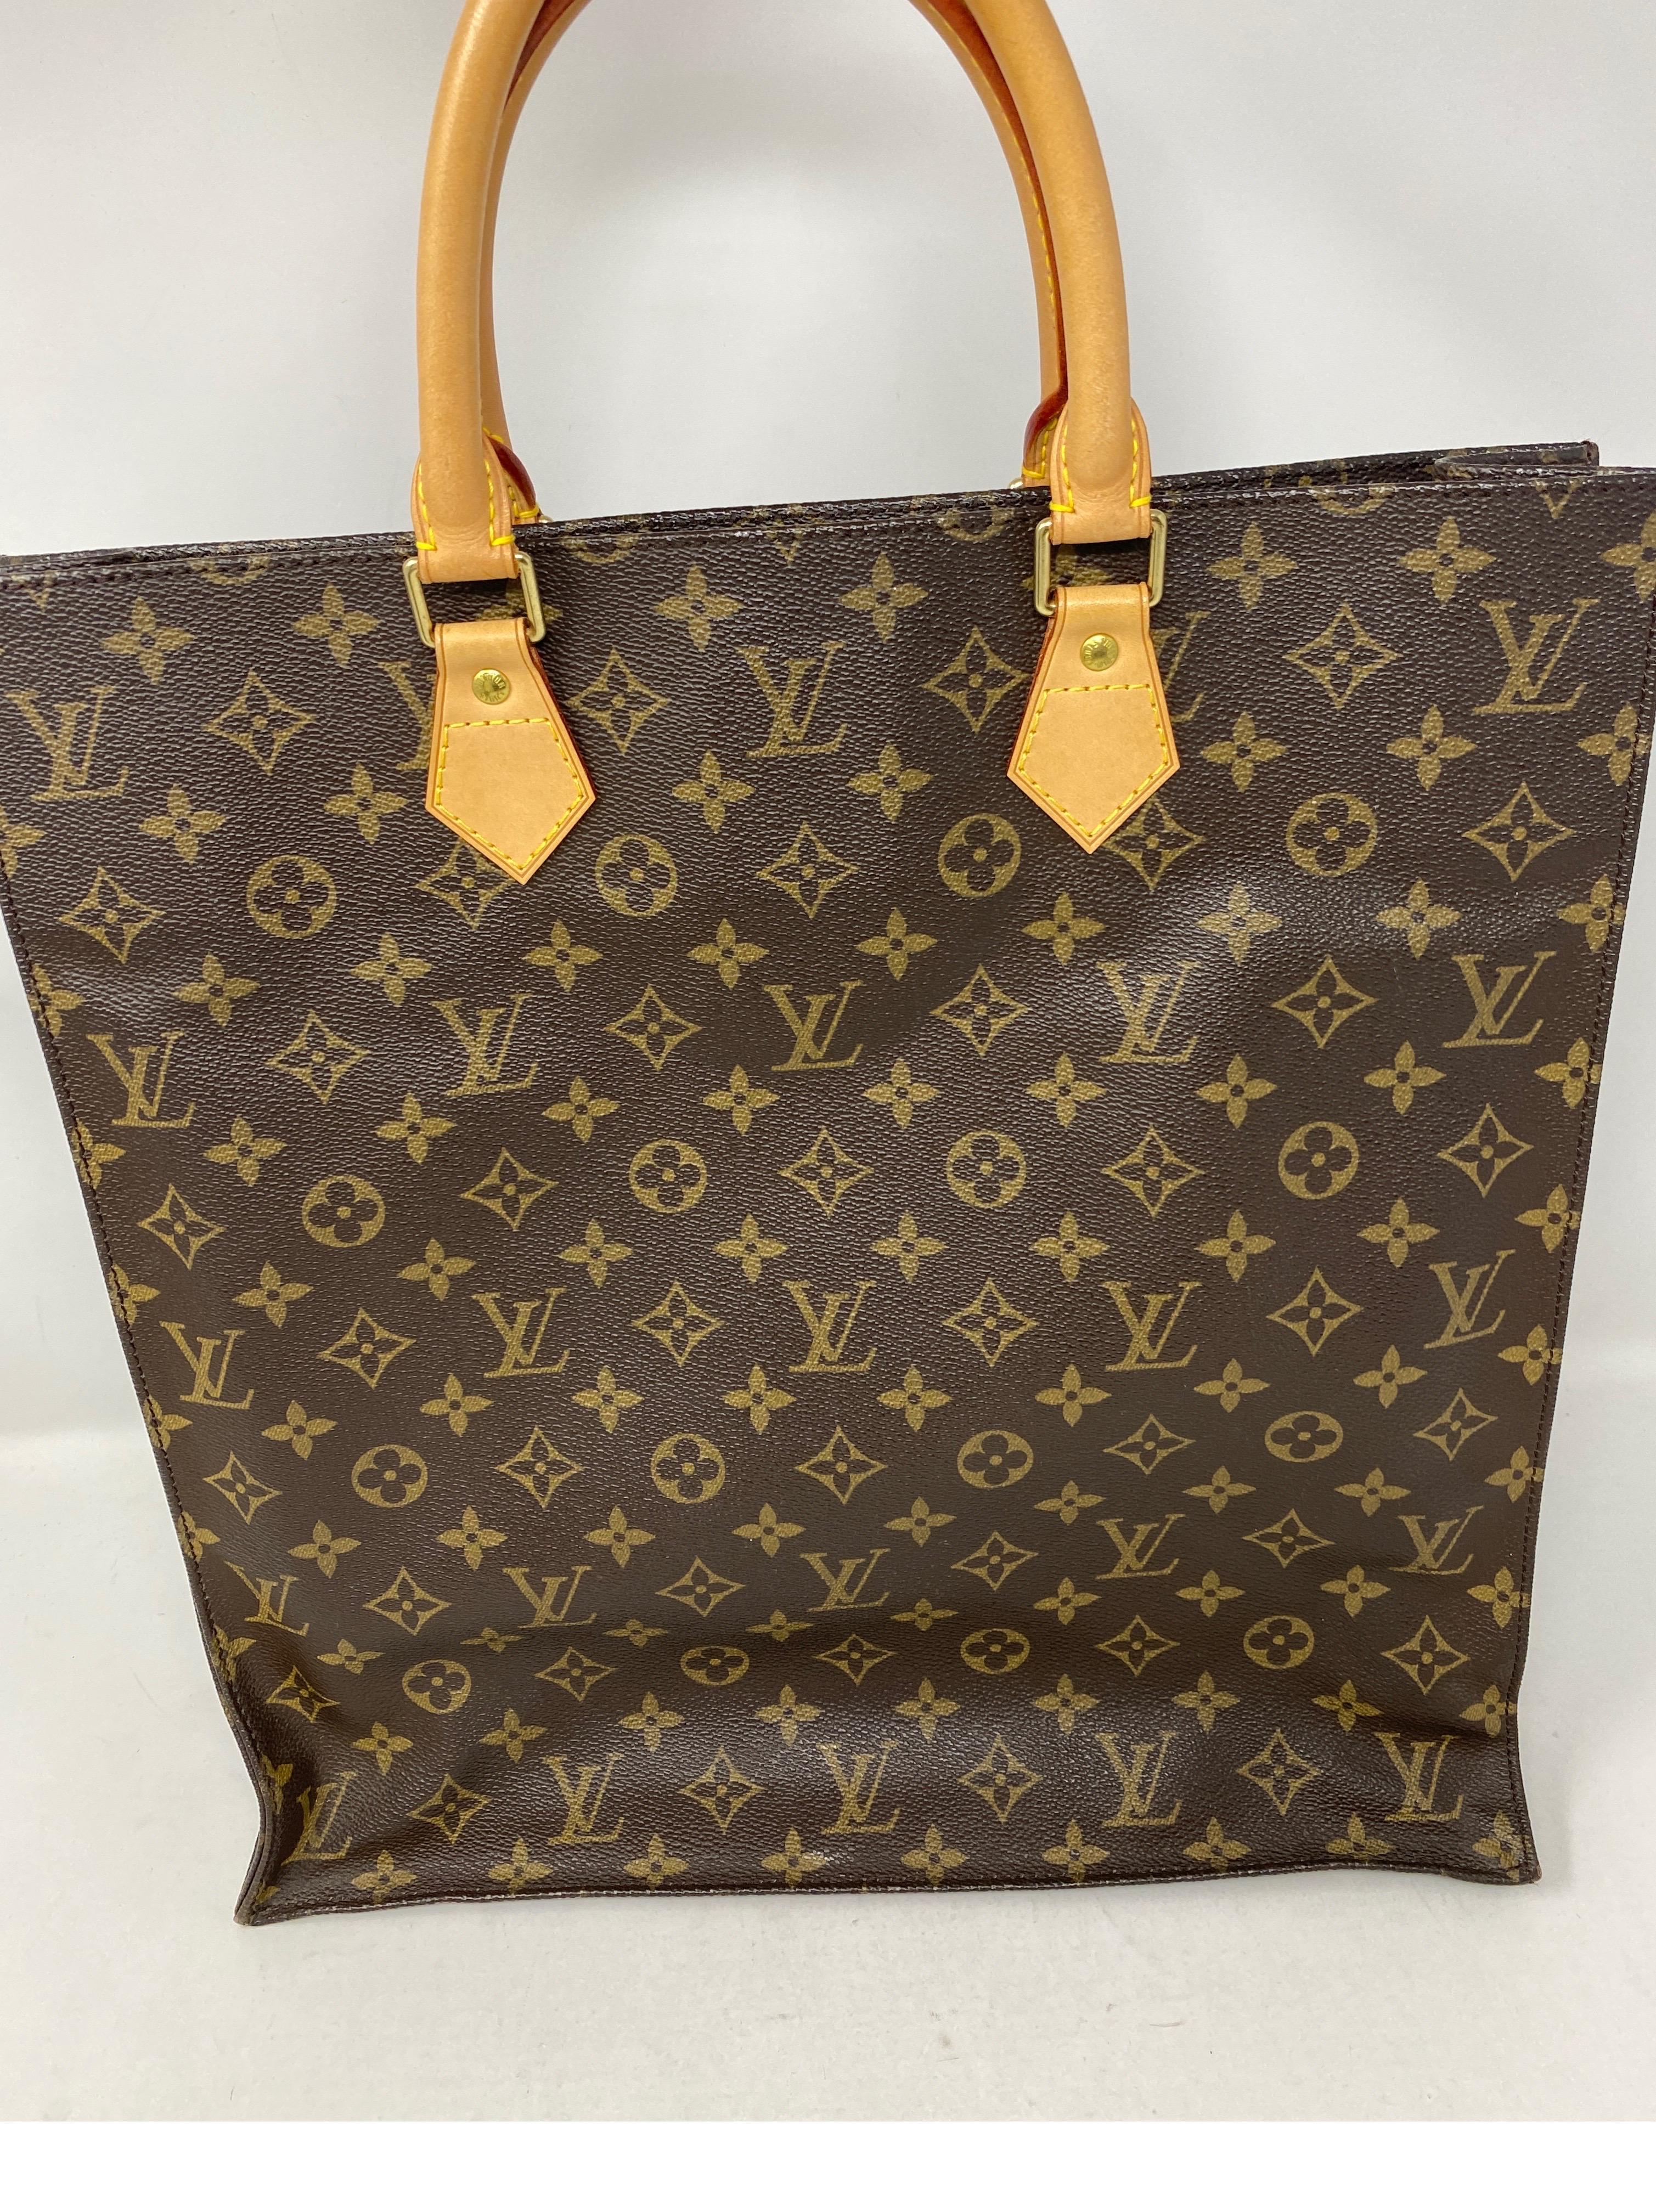 Louis Vuitton Le Sac Plat Tote. Monogram coated canvas. Retired from LV. Rare collector's piece. Guaranteed authentic. 